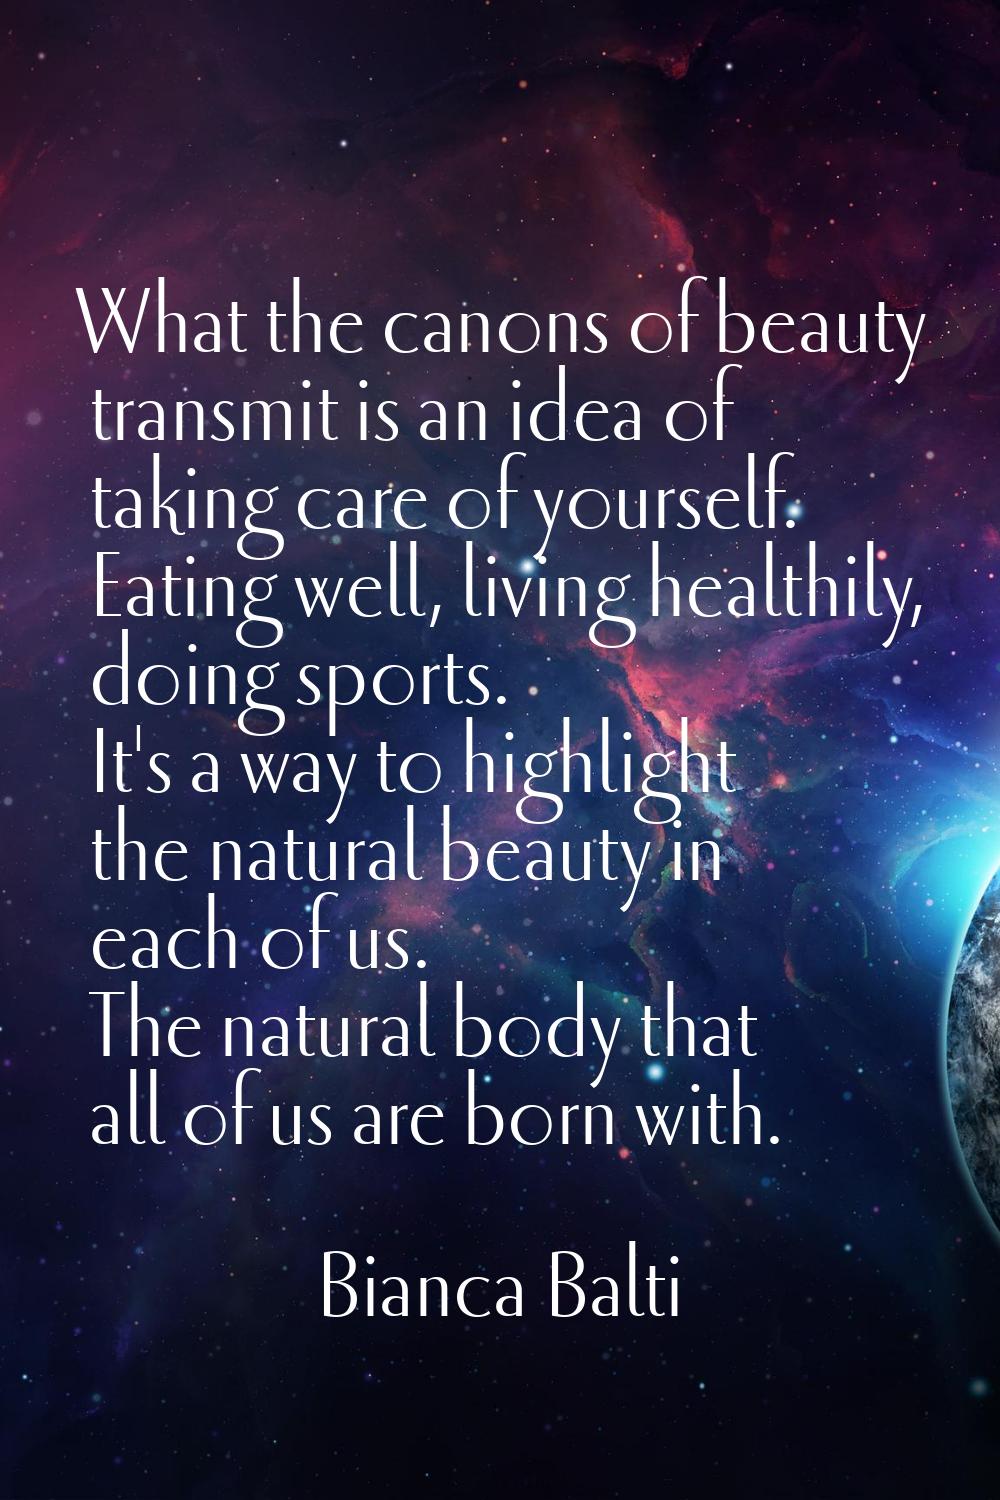 What the canons of beauty transmit is an idea of taking care of yourself. Eating well, living healt